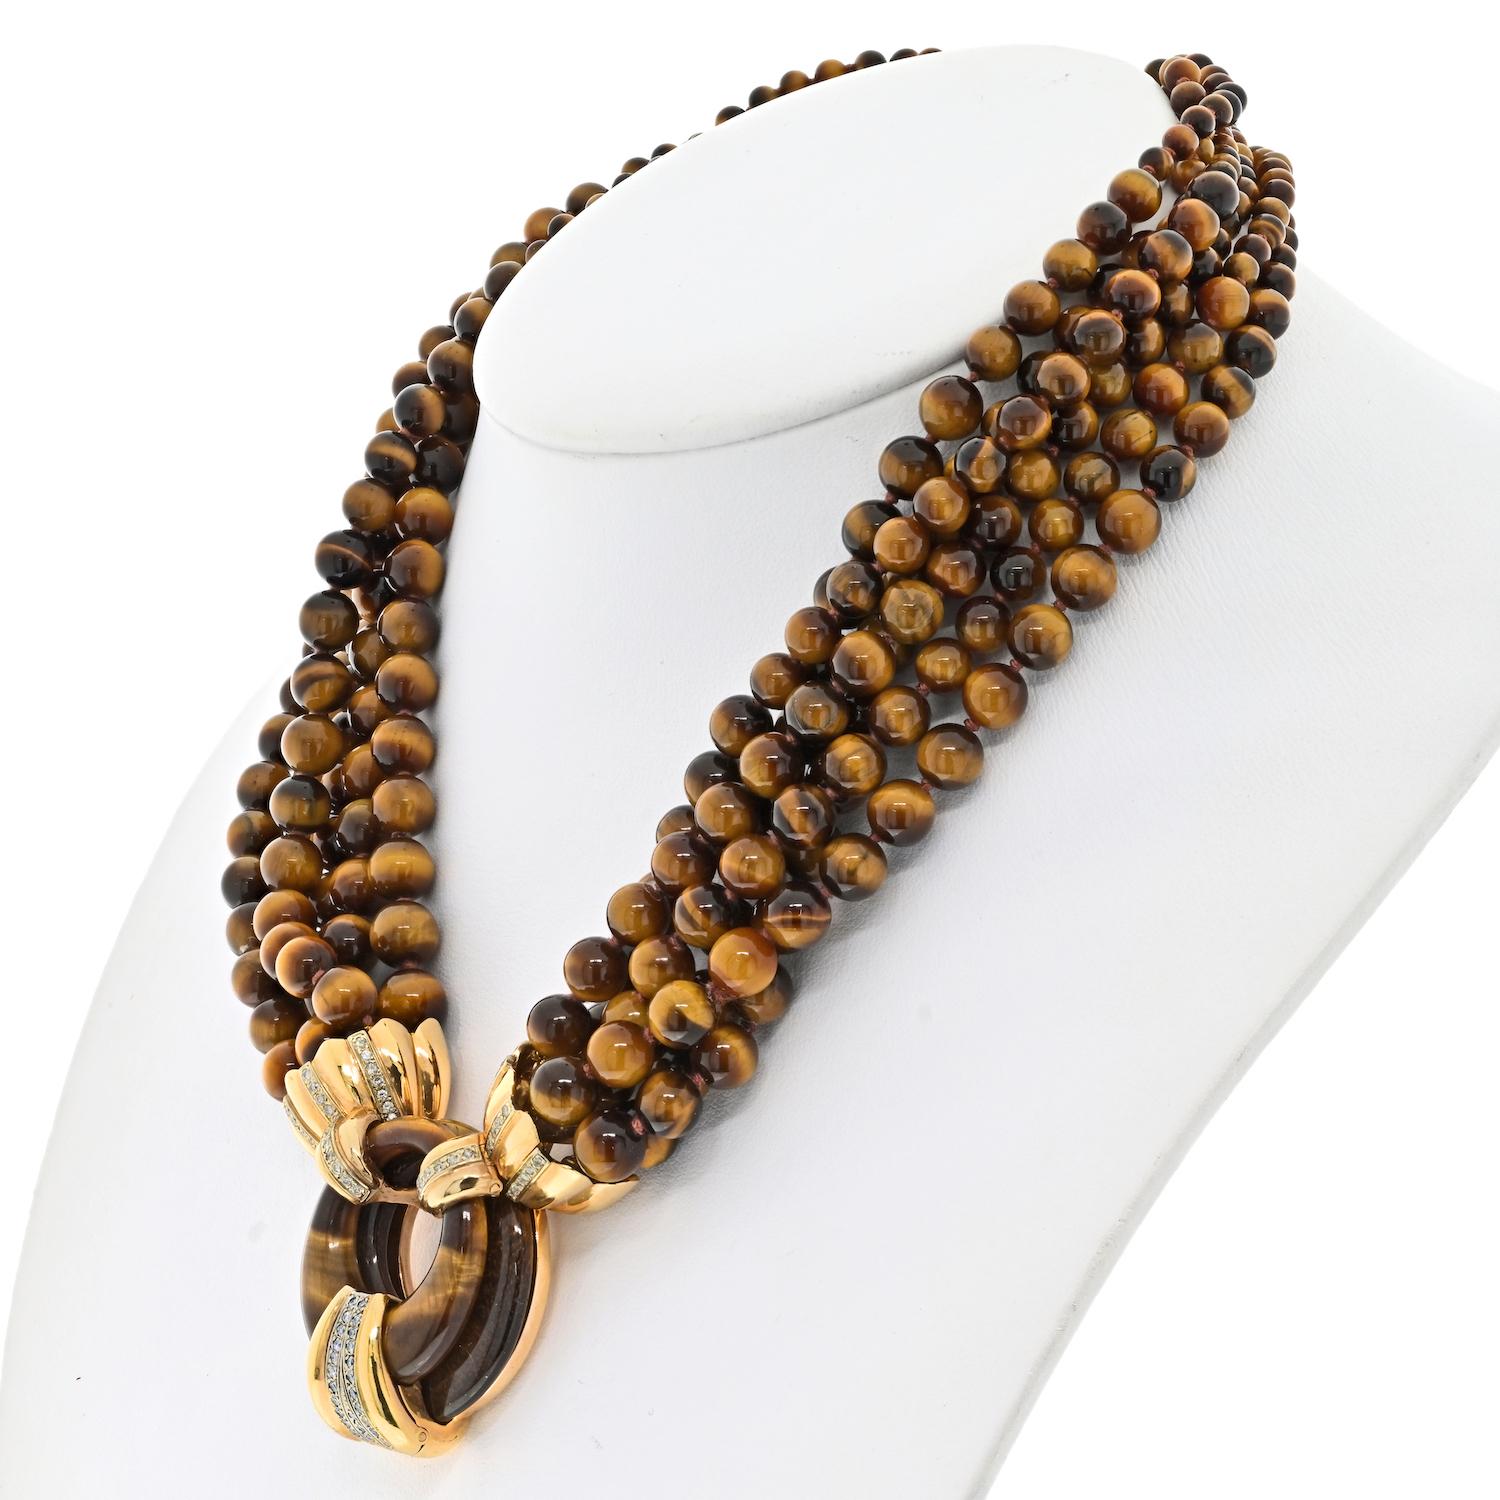 The 14K Yellow Gold Tiger Eye Multi-Strand Bead Diamond Necklace is a truly exquisite piece of jewelry. The necklace features six strands of beautifully crafted tiger eye beads, each with their own unique pattern, creating a stunning visual effect.